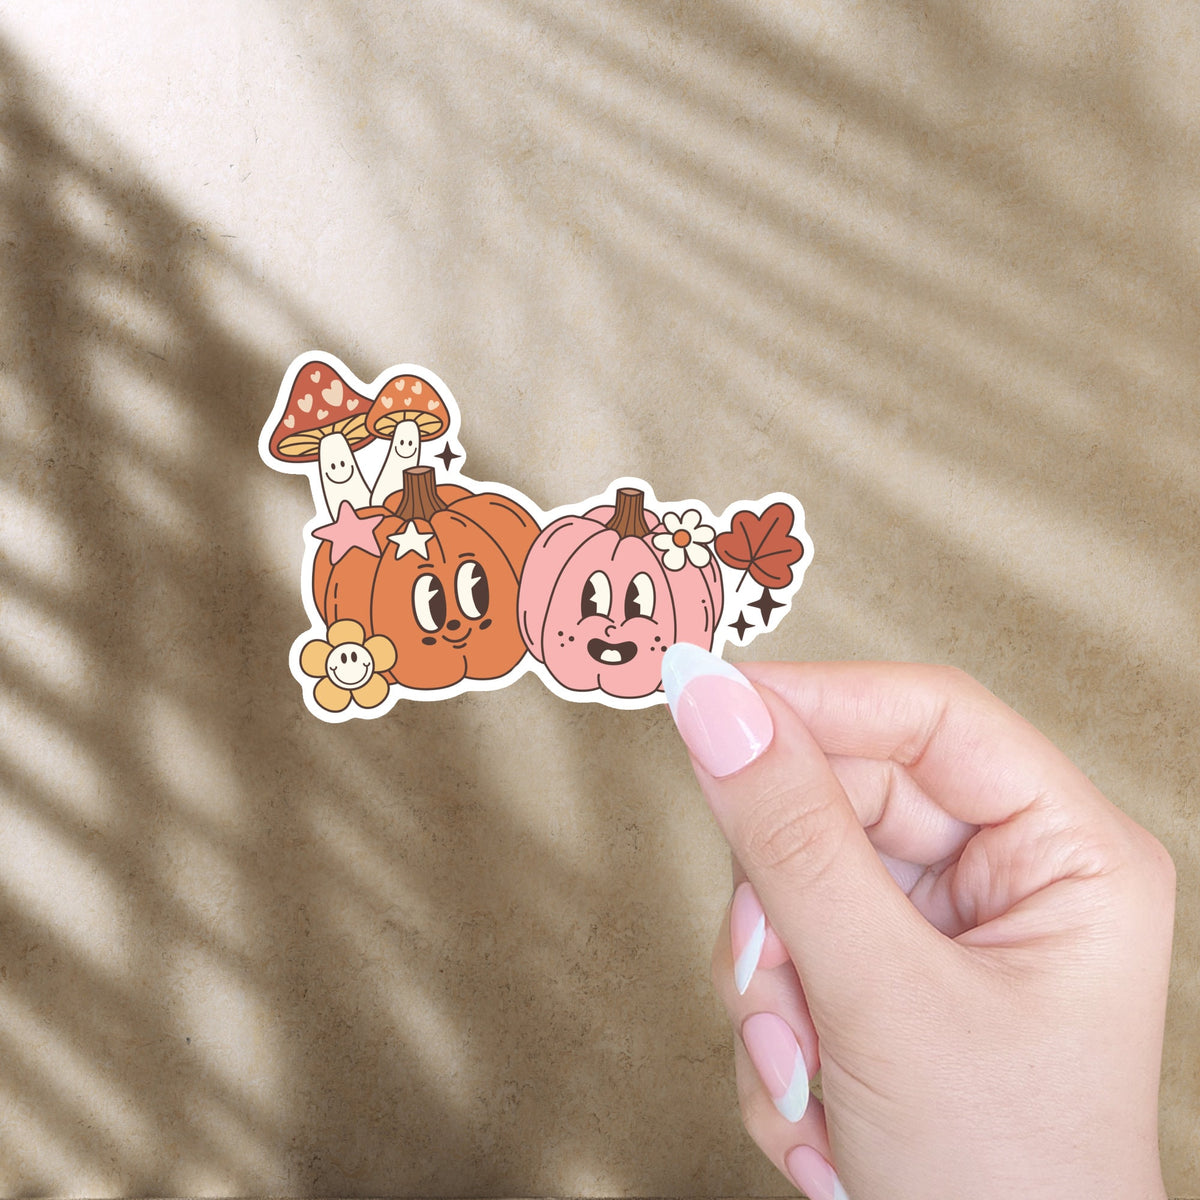 Halloween Sticker Pack, Kindle Stickers, Halloween Stickers, Aesthetic Stickers, Cute Stickers